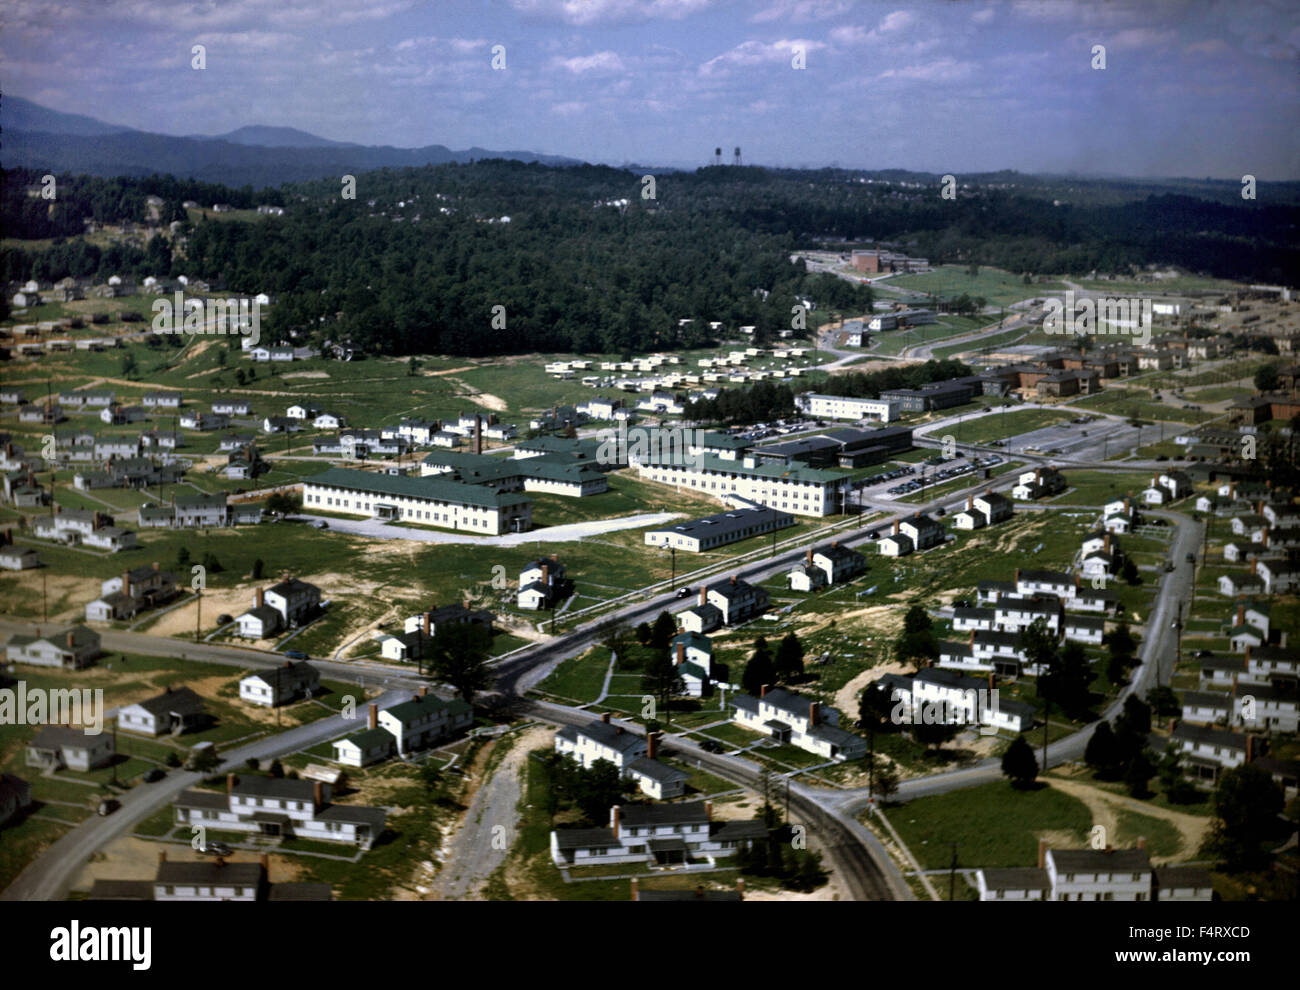 View of the City of Oak Ridge. 1945. The town of Oak Ridge was established by the Army Corps of Engineers as part of the Clinton Stock Photo